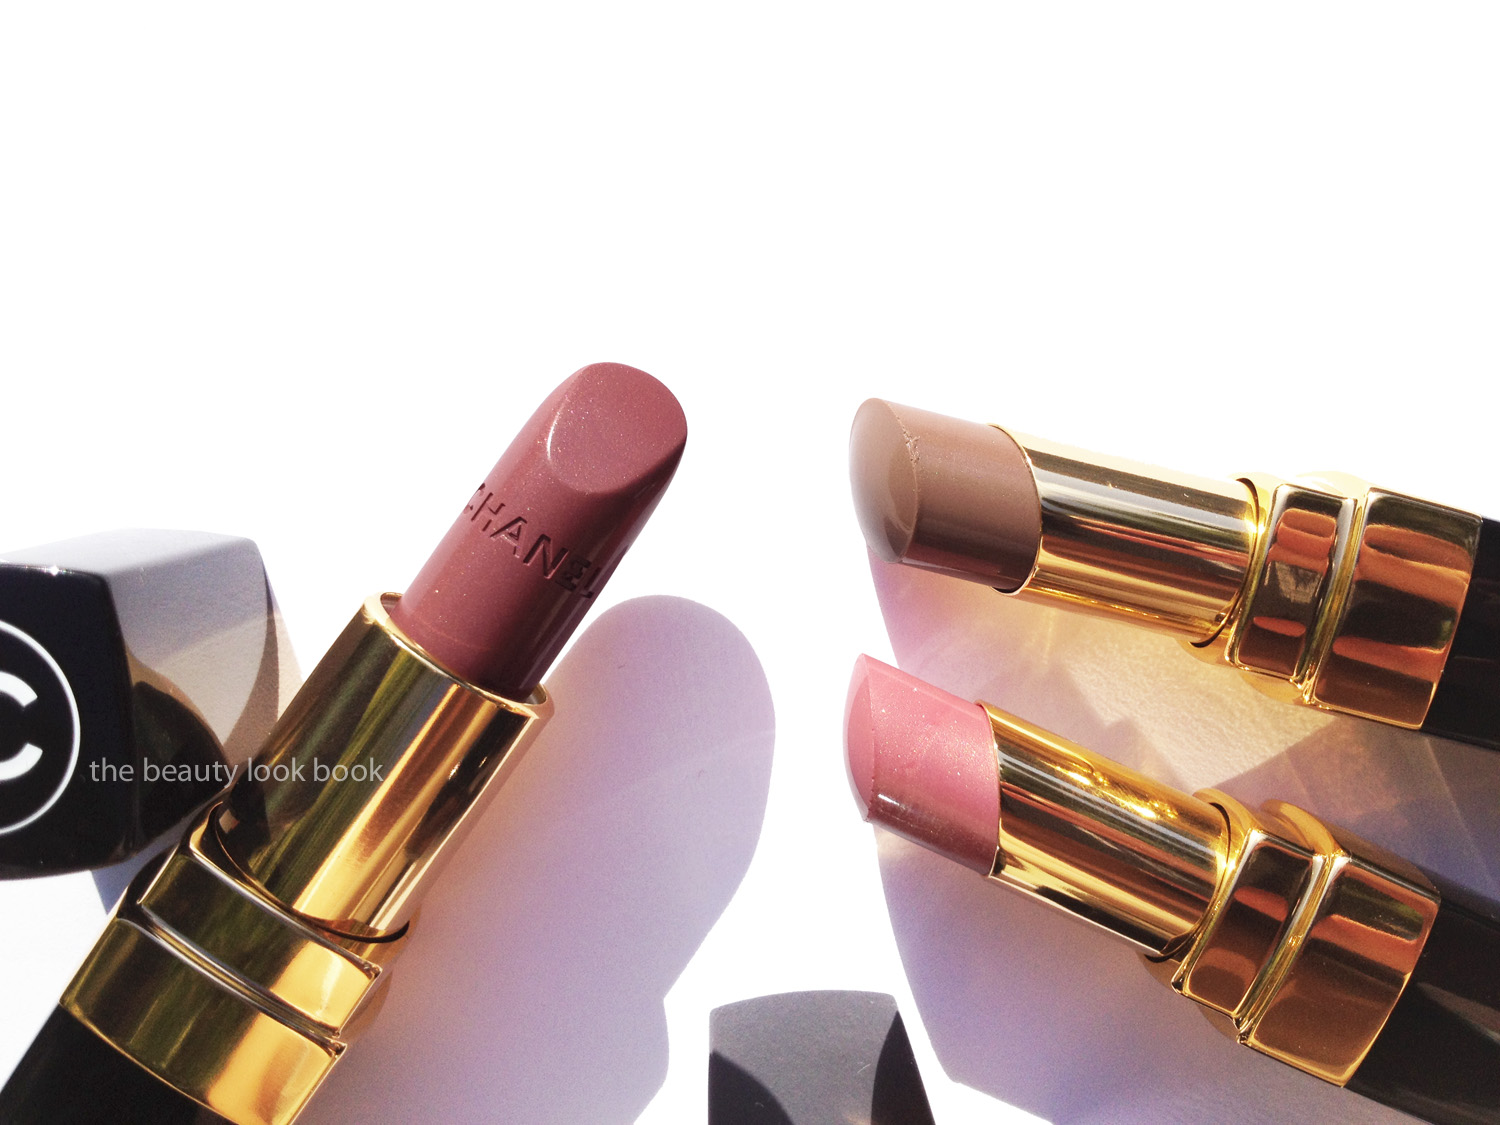 Chanel Caractère #45 Rouge Coco, Chic #73 and Parfait #74 Rouge Coco Shines  - The Beauty Look Book